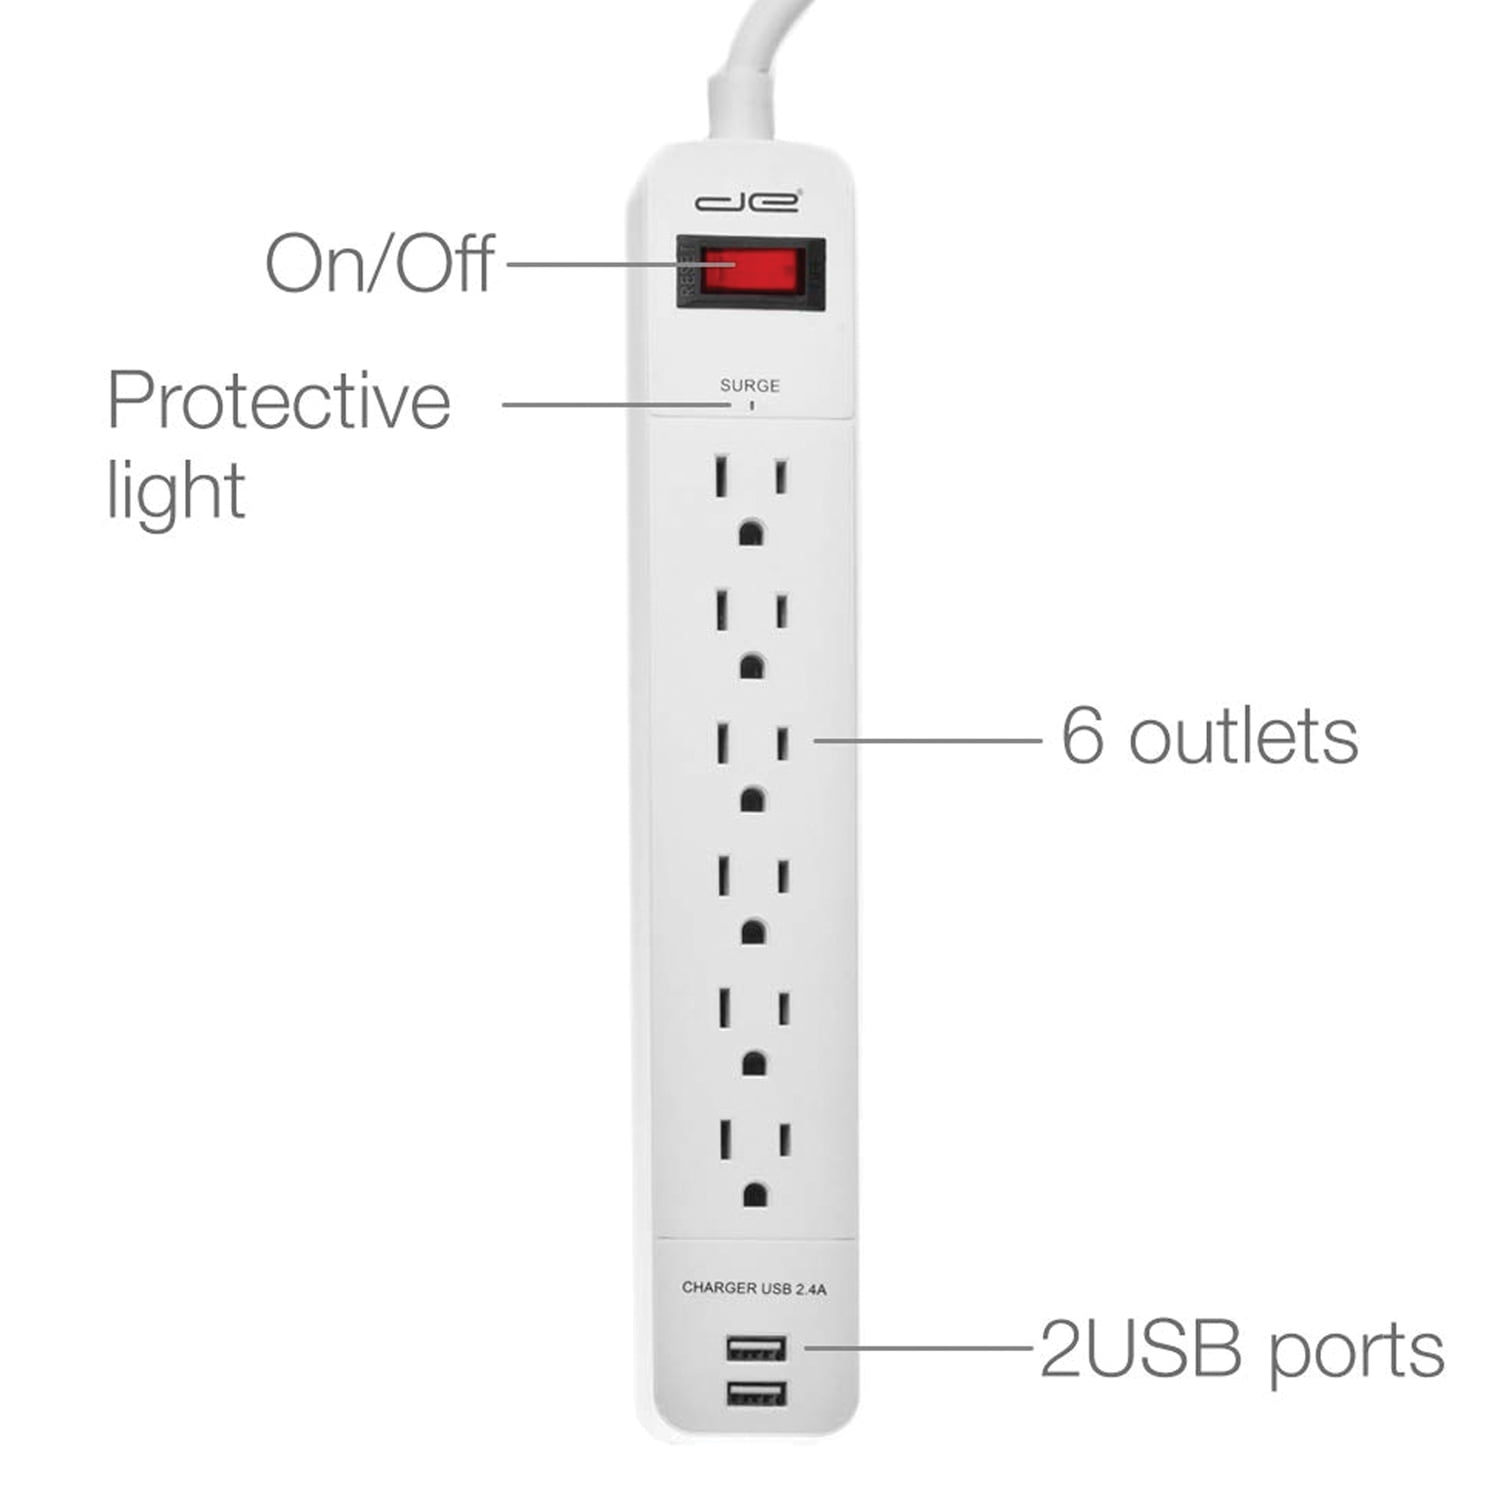  Refrigerator Surge Protector, Ortis Double Outlet Voltage  Protector for Home Appliances with Time Delay, Protects Against Brownout,  Spike, Instant Surge All Voltage Abnormalities, Yellow : Electronics